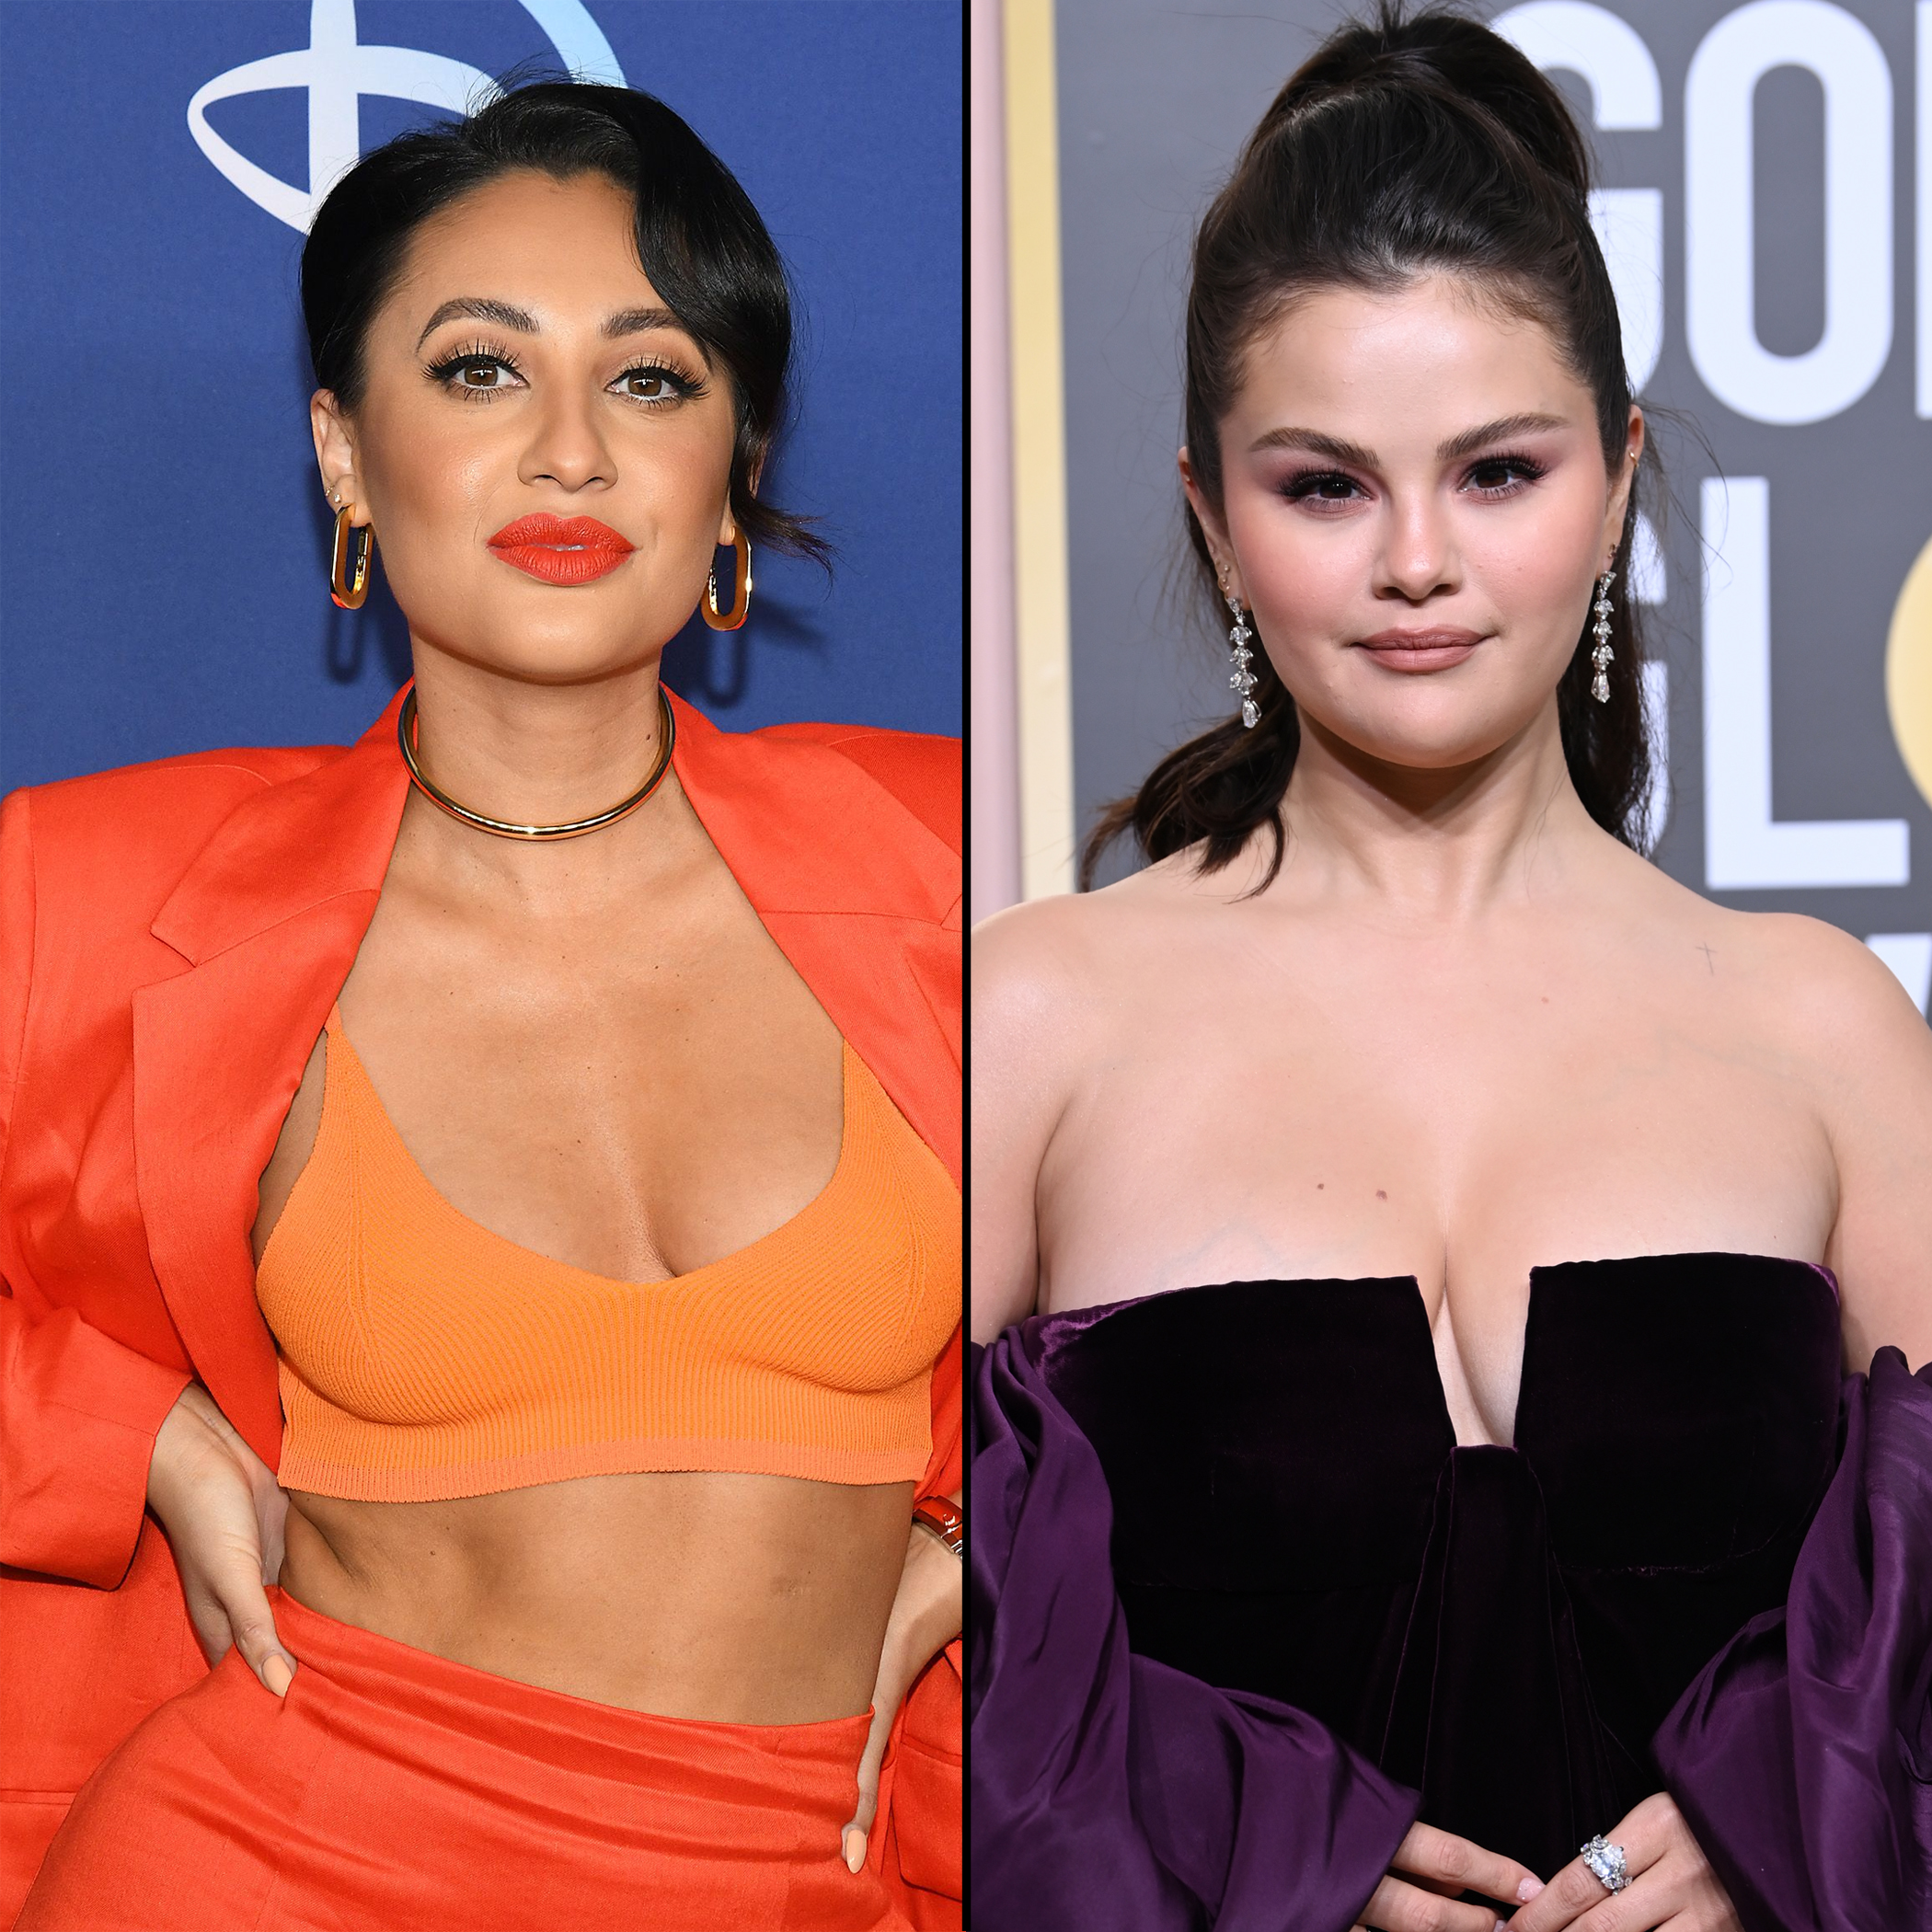 https://www.usmagazine.com/wp-content/uploads/2023/05/Francia-Raisa-Dodges-Questions-About-Her-Friendship-With-Selena-Gomez-Amid-Feud-Rumors.jpg?quality=86&strip=all